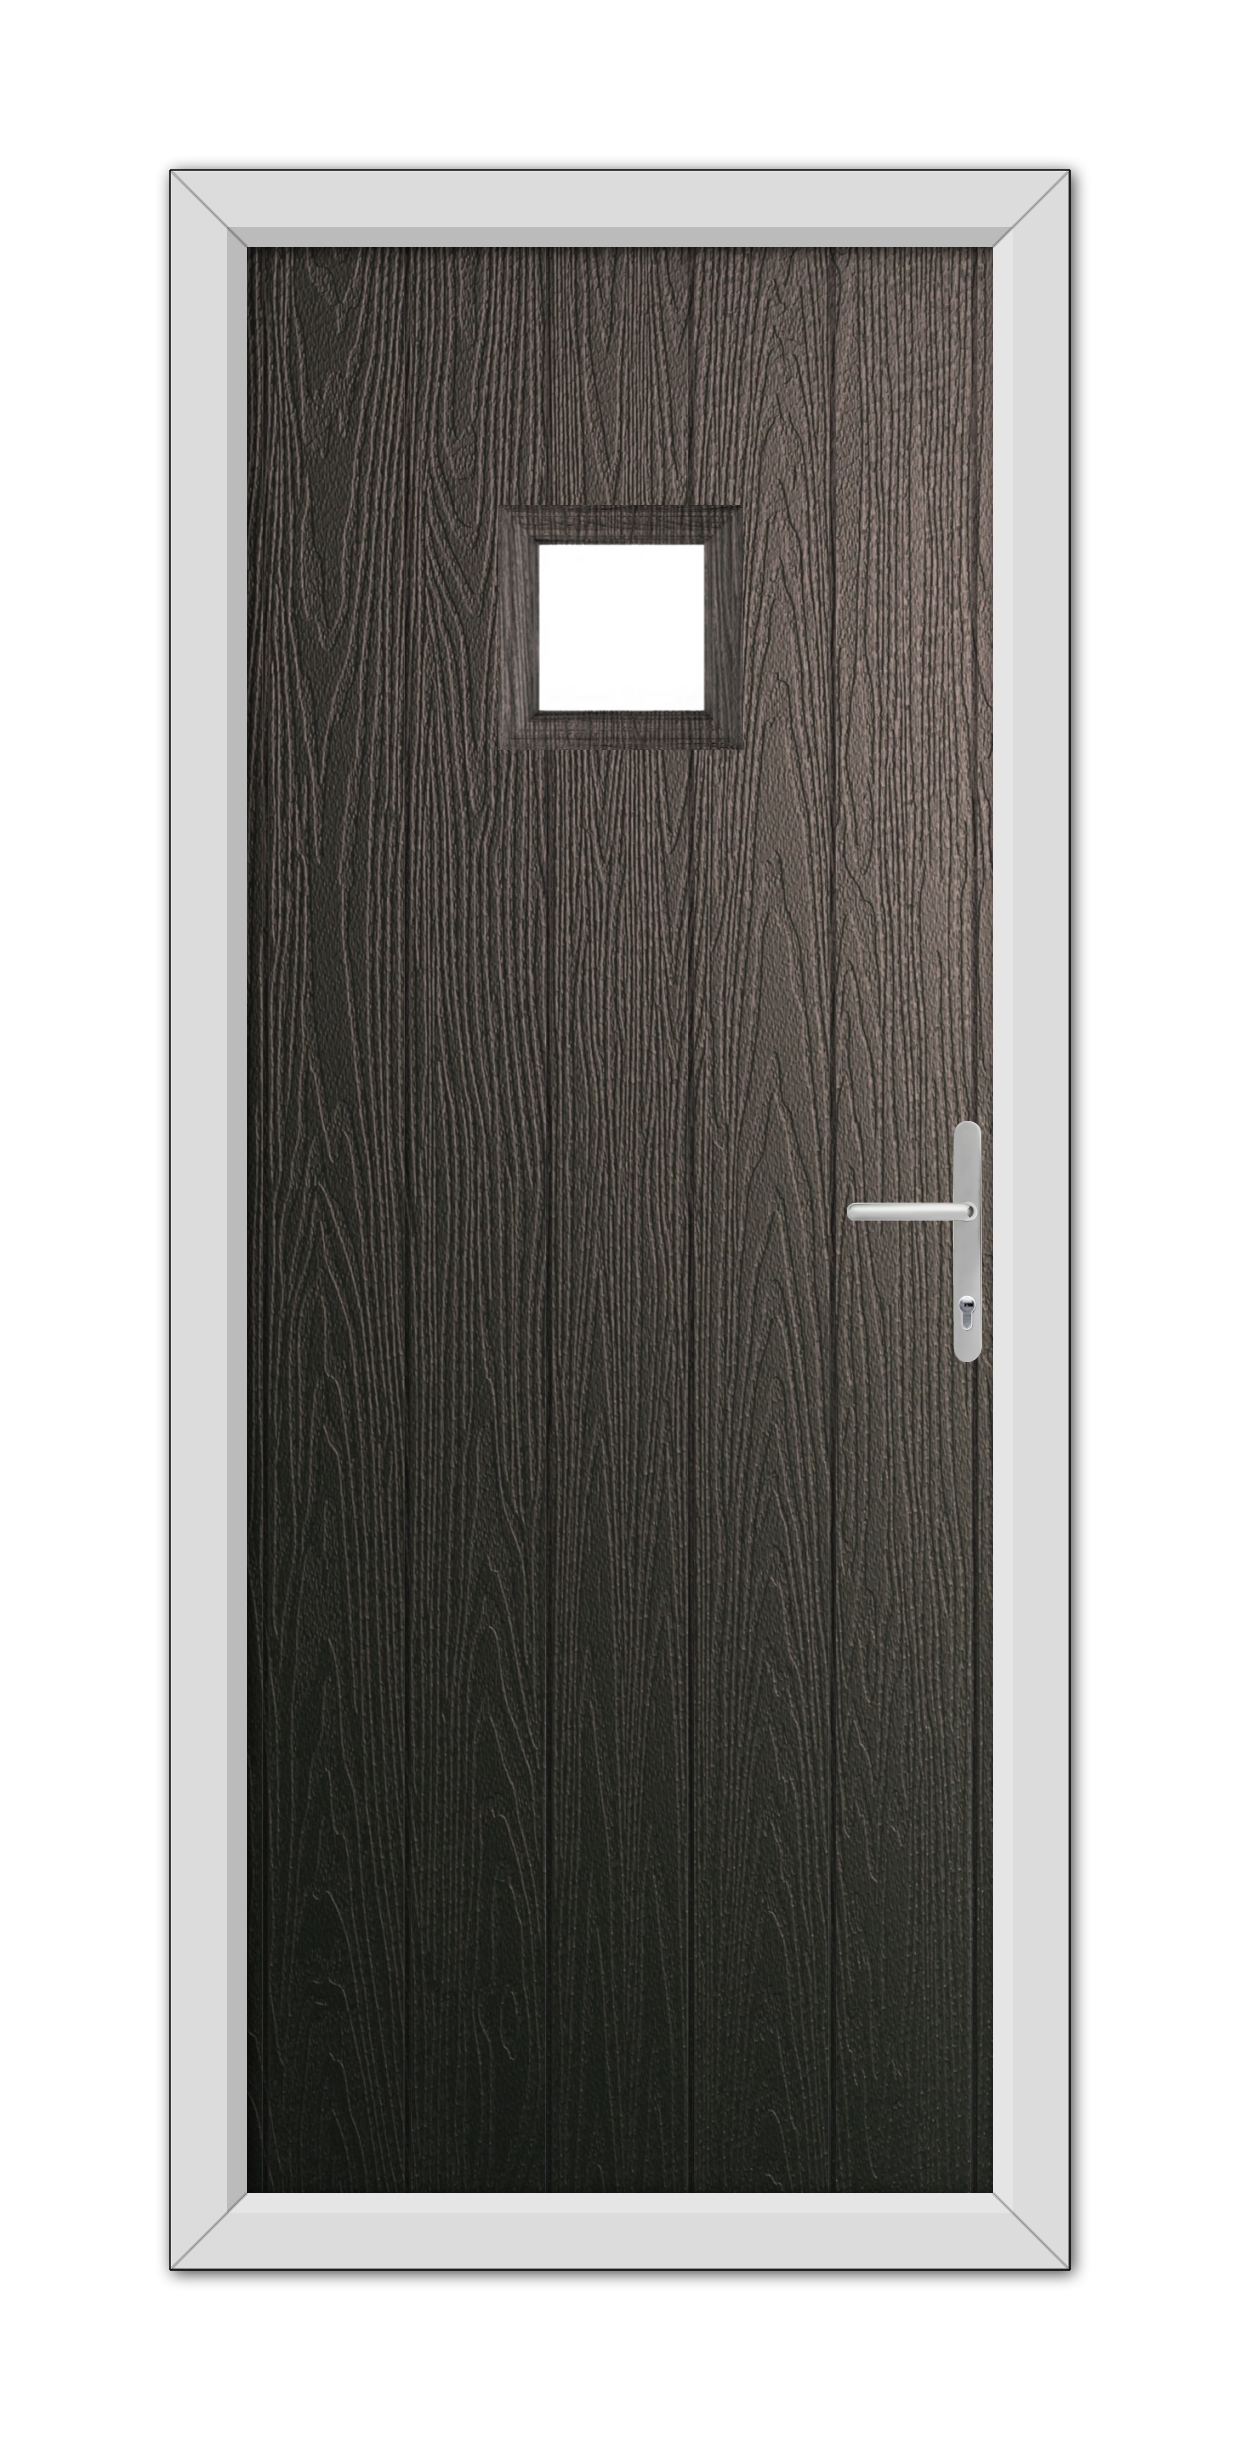 A Schwarzbraun Brampton Composite Door 48mm Timber Core with a square window and a silver handle, set within a white frame, against a white background.